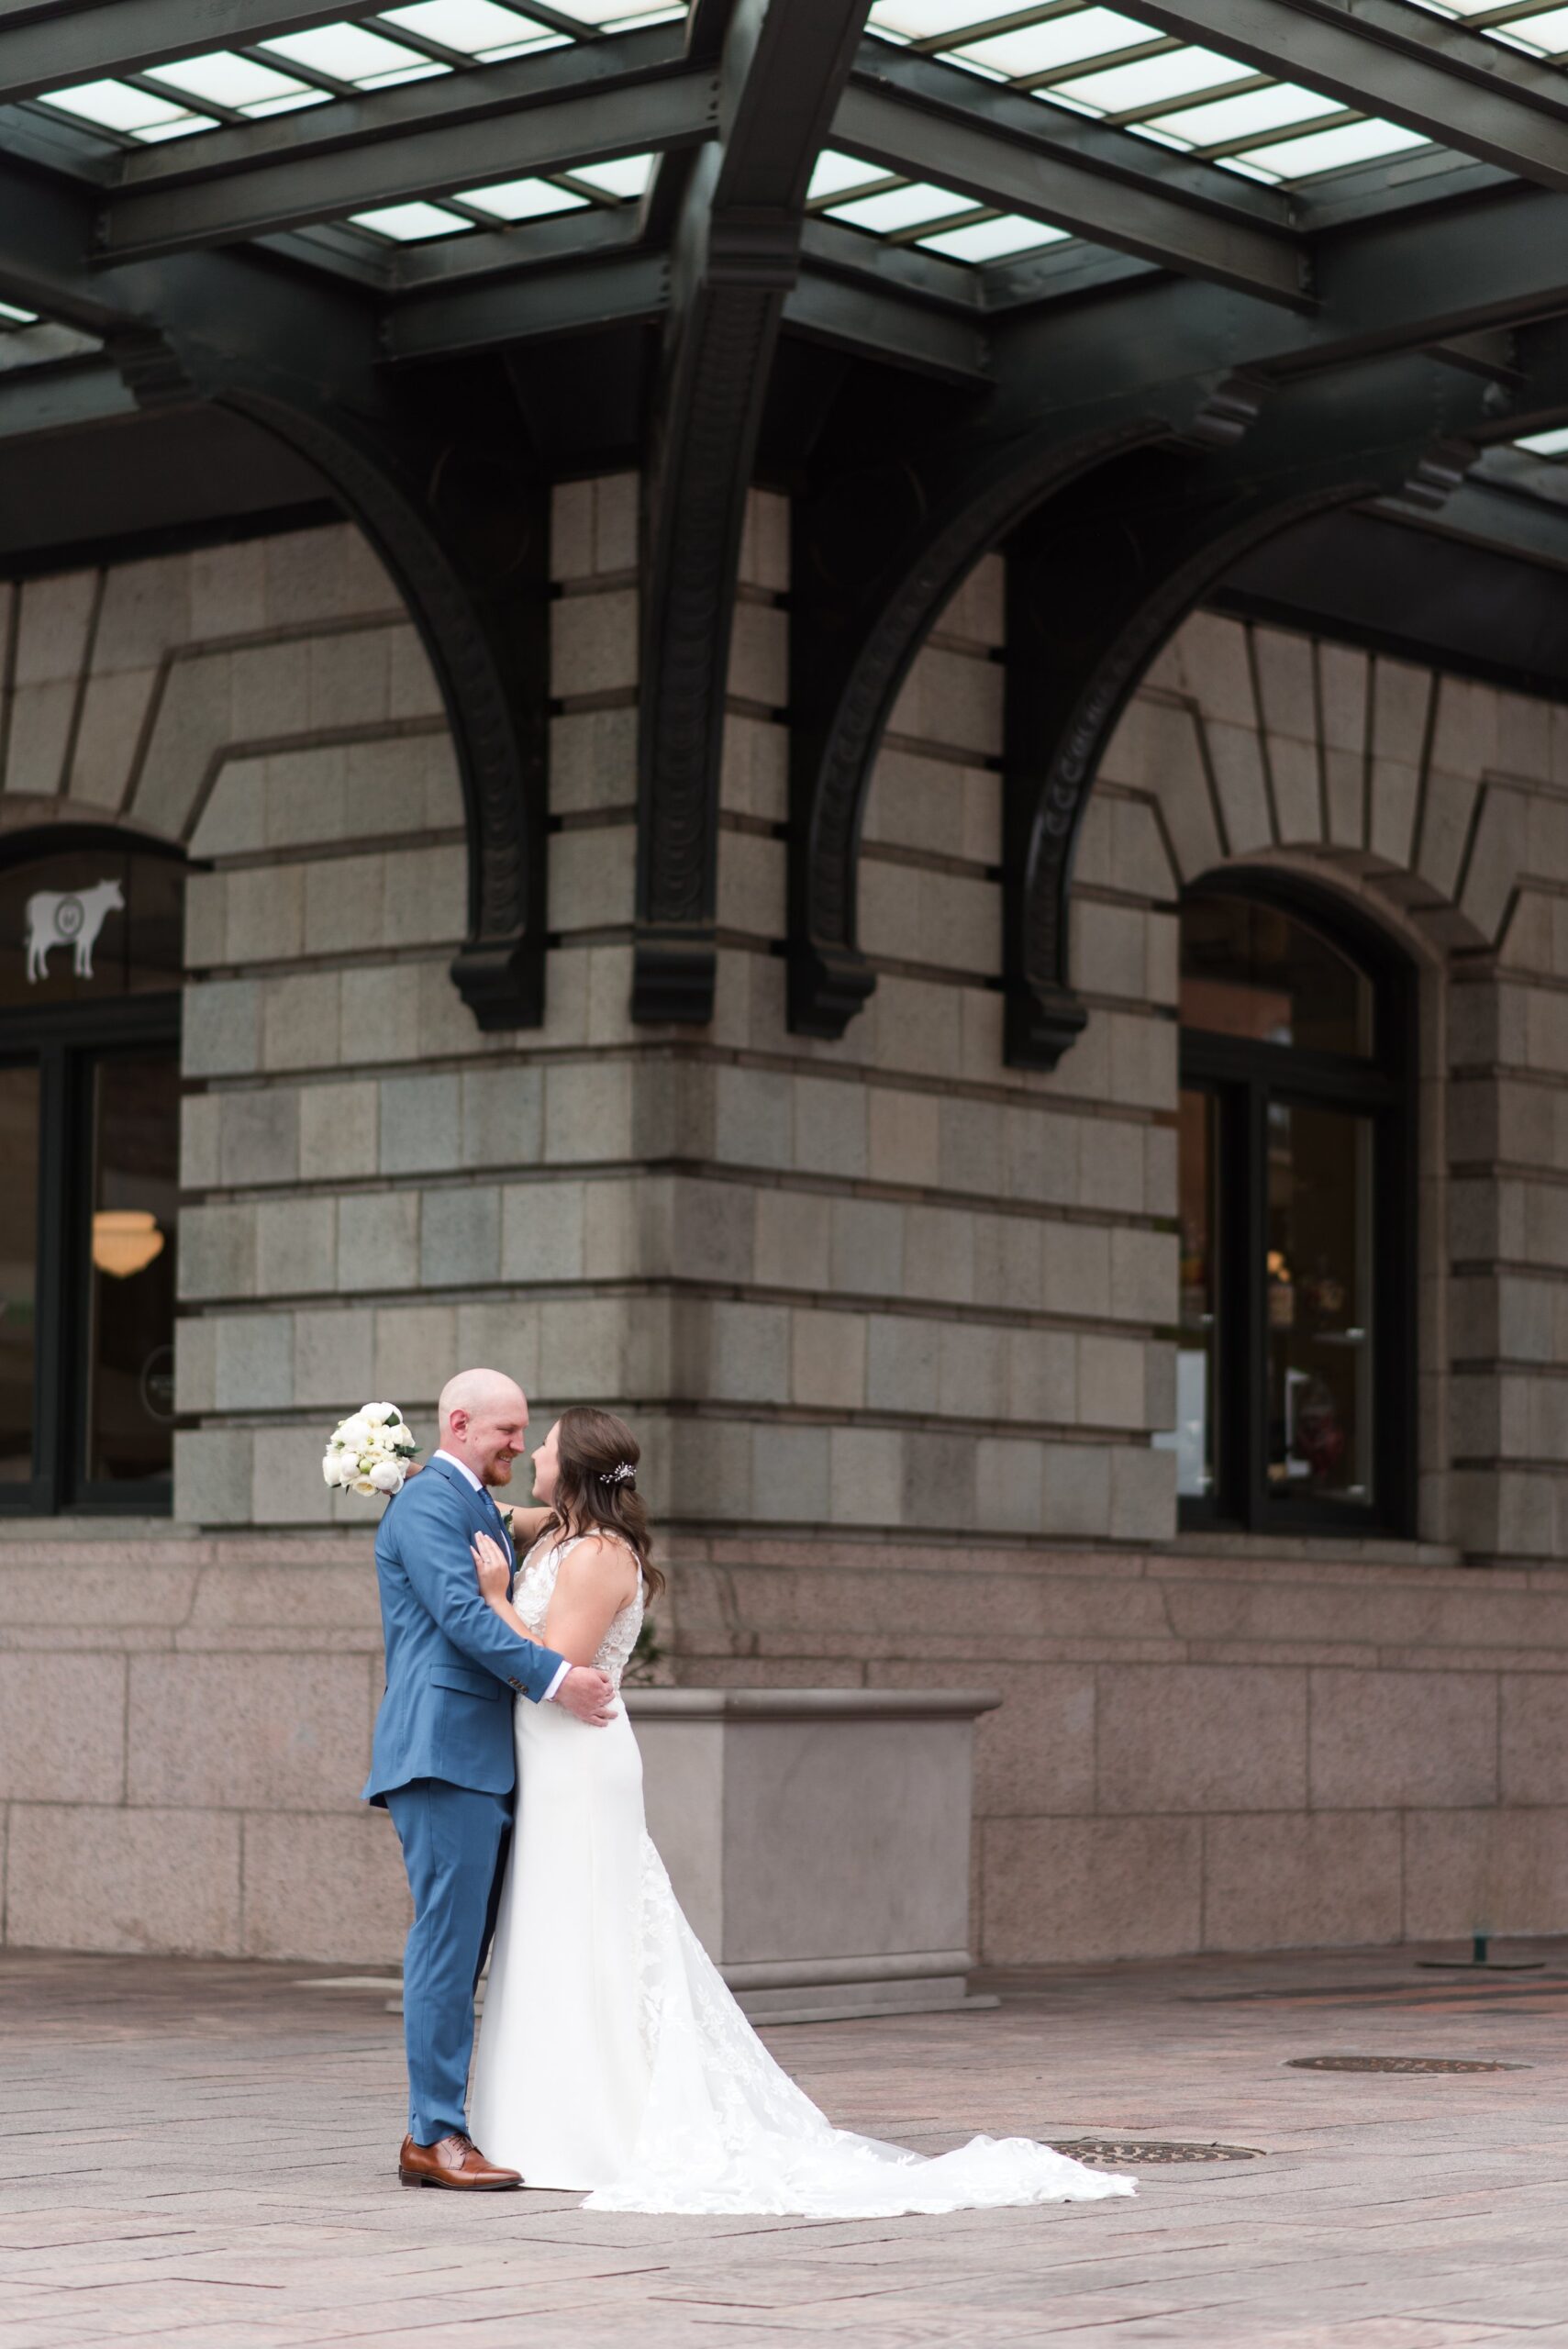 Denver wedding photographer captures a couple embracing under an awning at union station